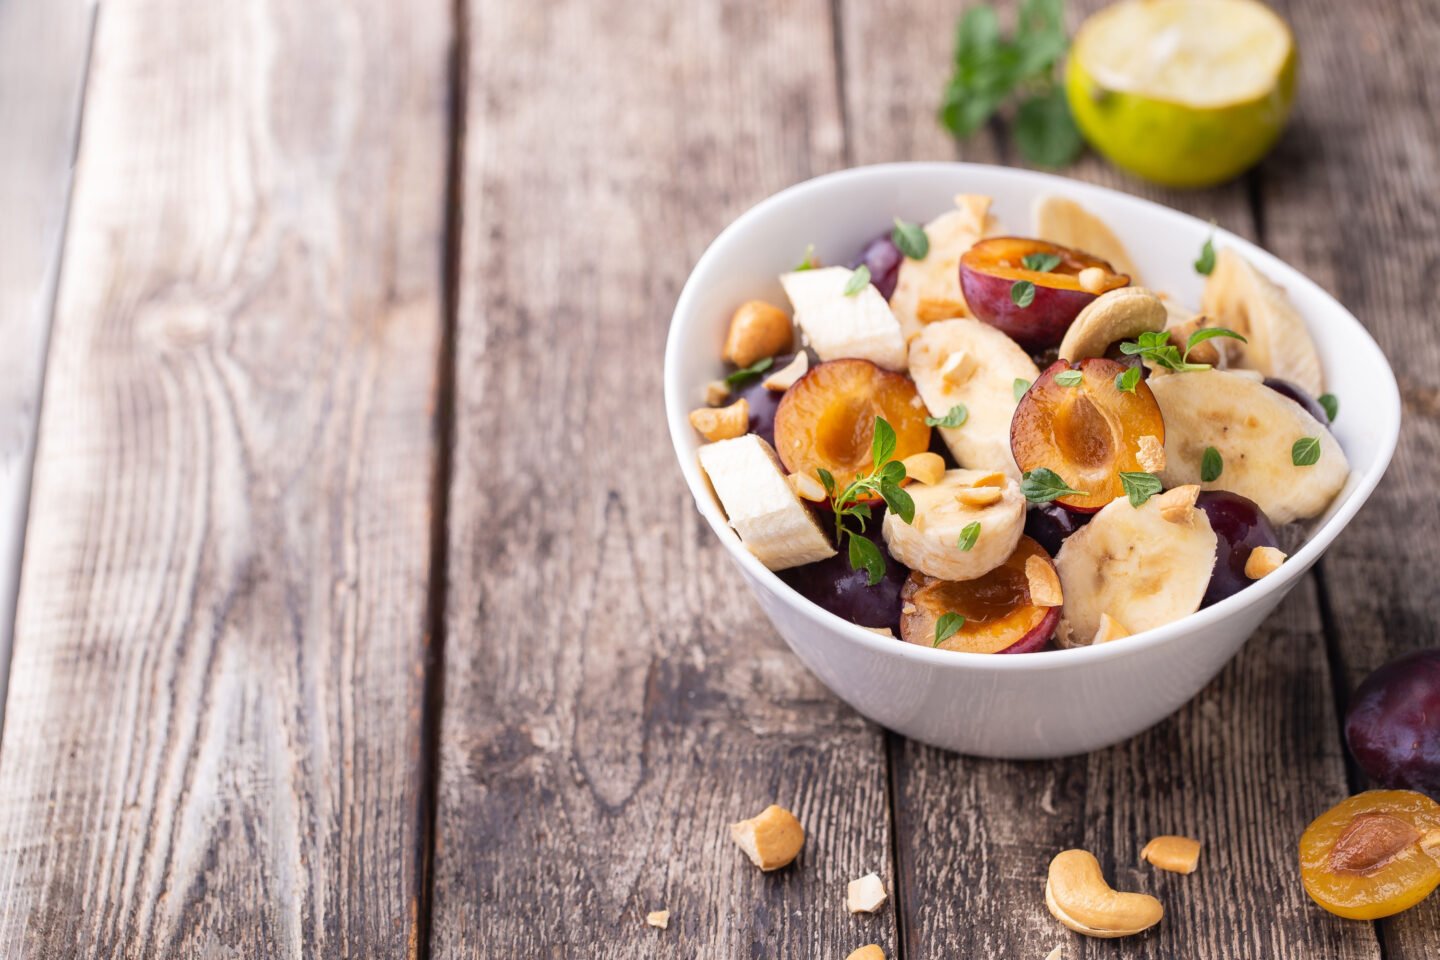 plum banana salad with lime dressing and cashew